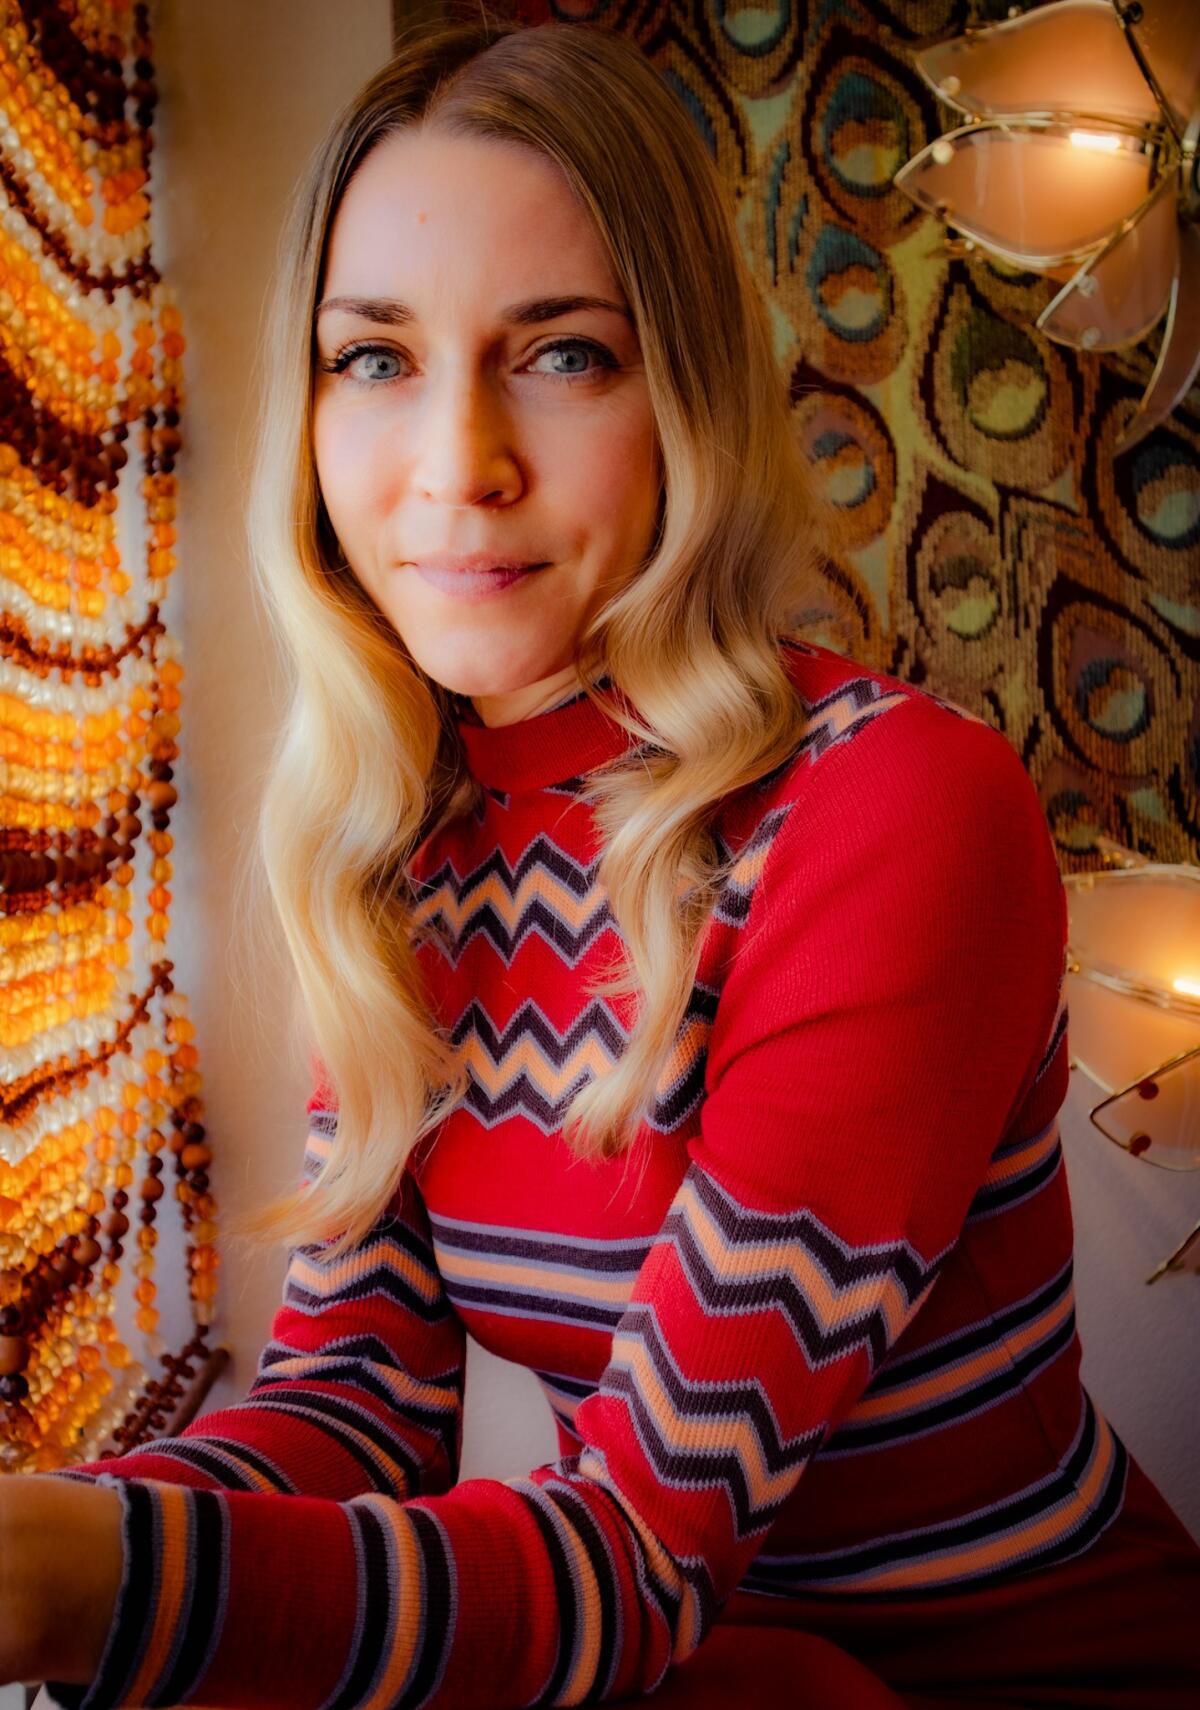 A woman with long blond hair in a red striped sweater